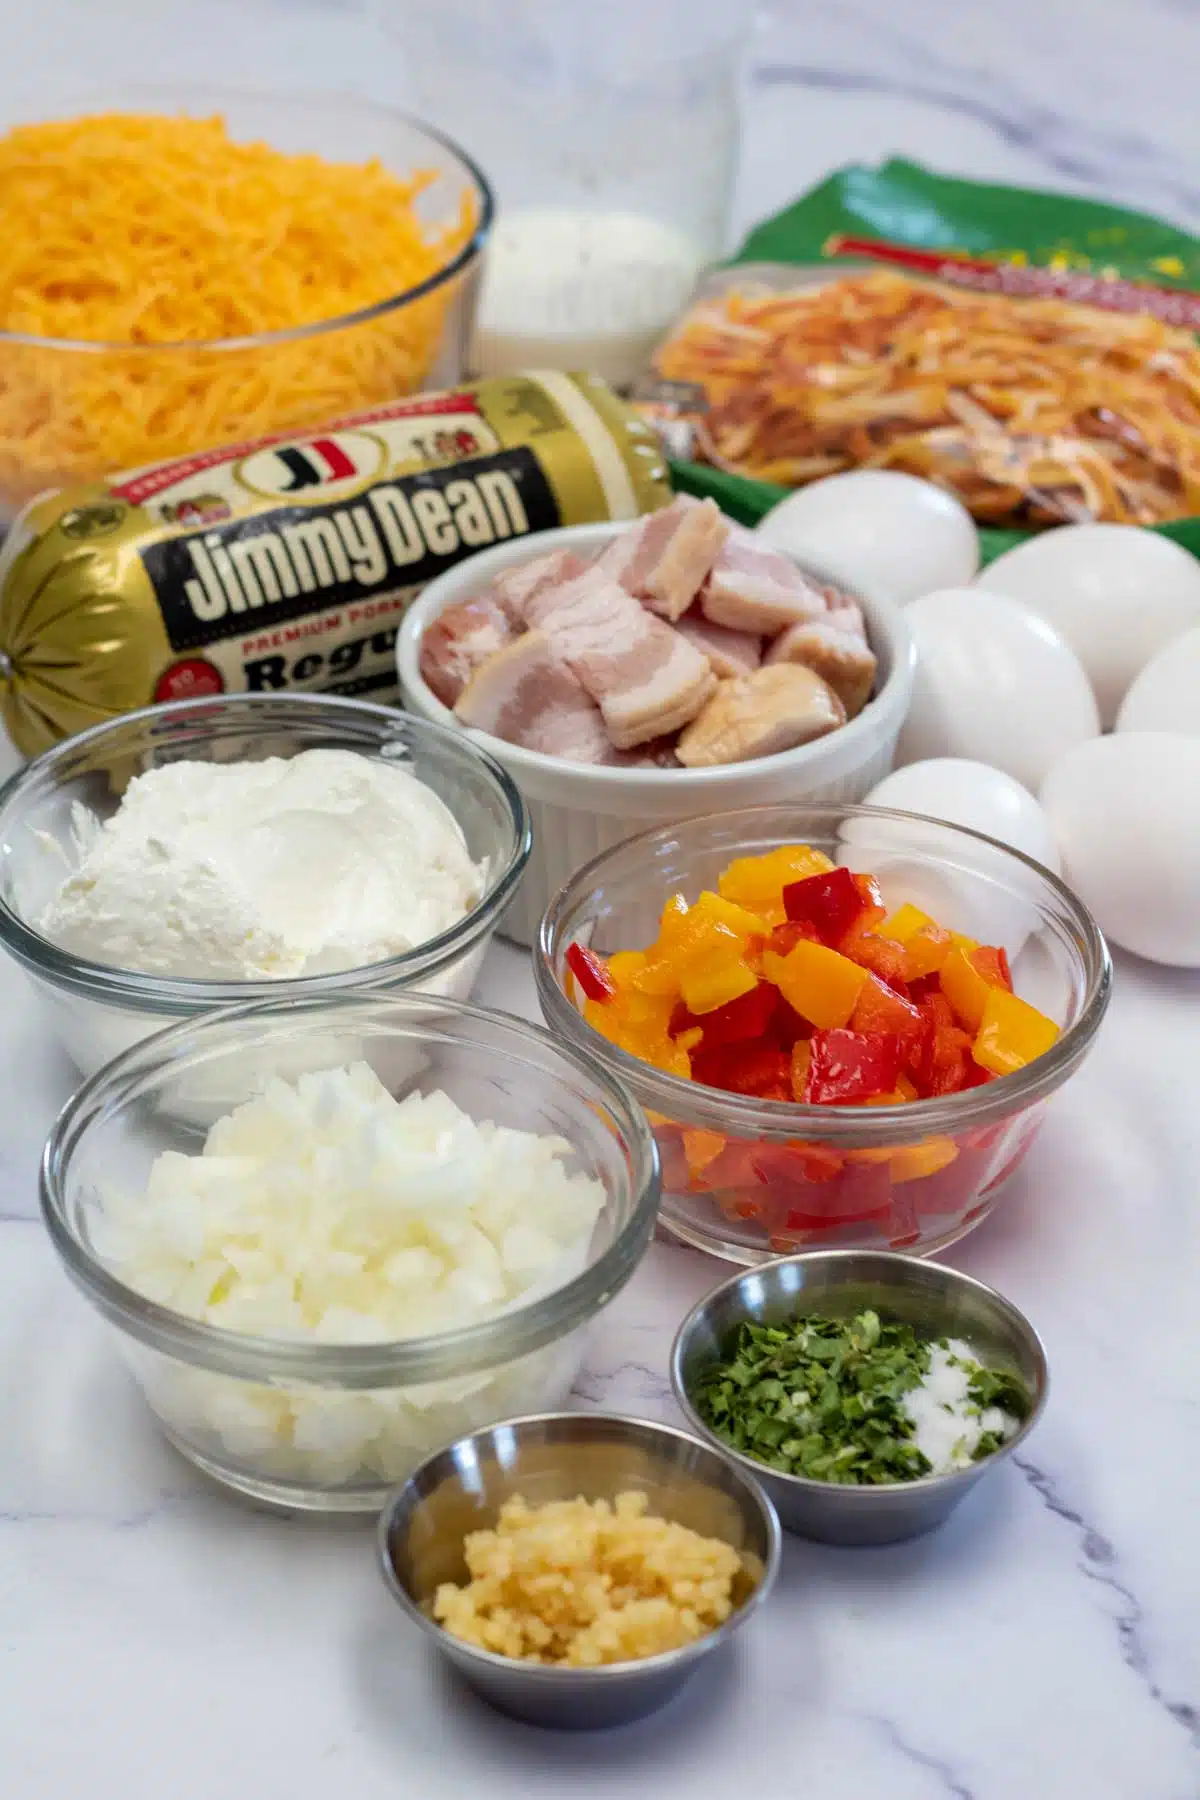 Tall image showing ingredients needed for this breakfast casserole.